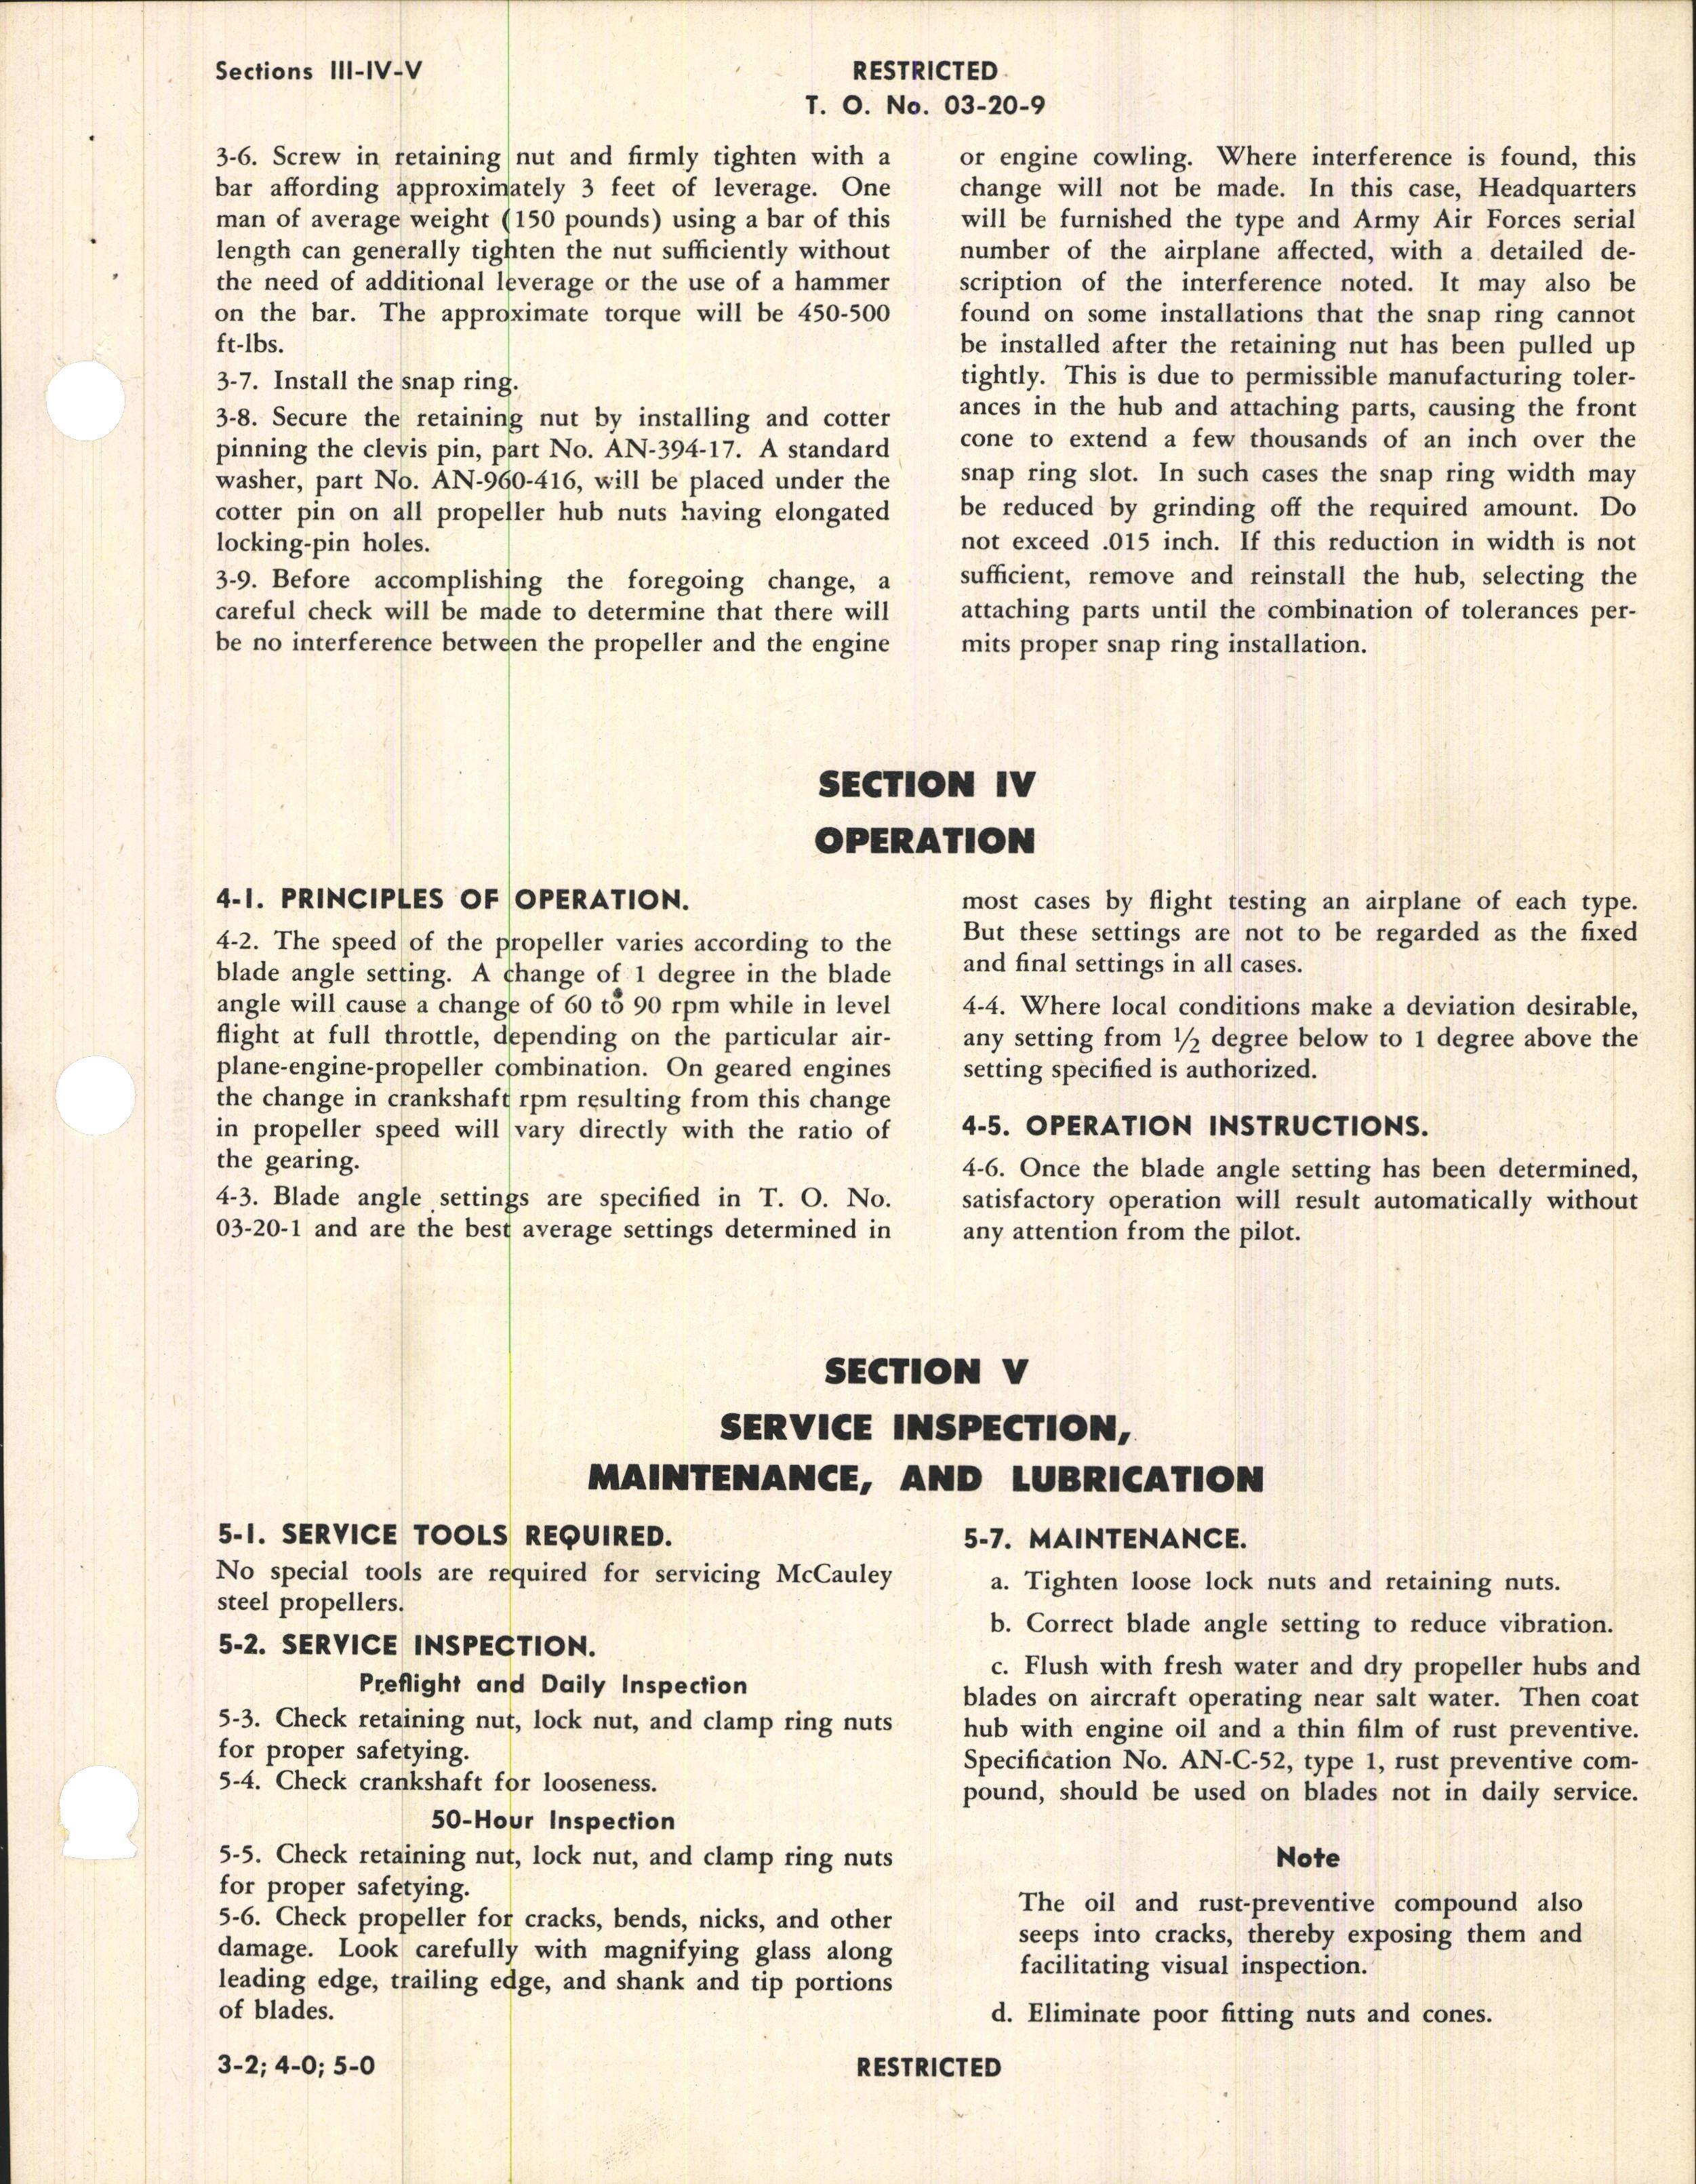 Sample page 5 from AirCorps Library document: Operation, Serivce, & Overhaul Instructions with Parts Catalog for Steel Propellers